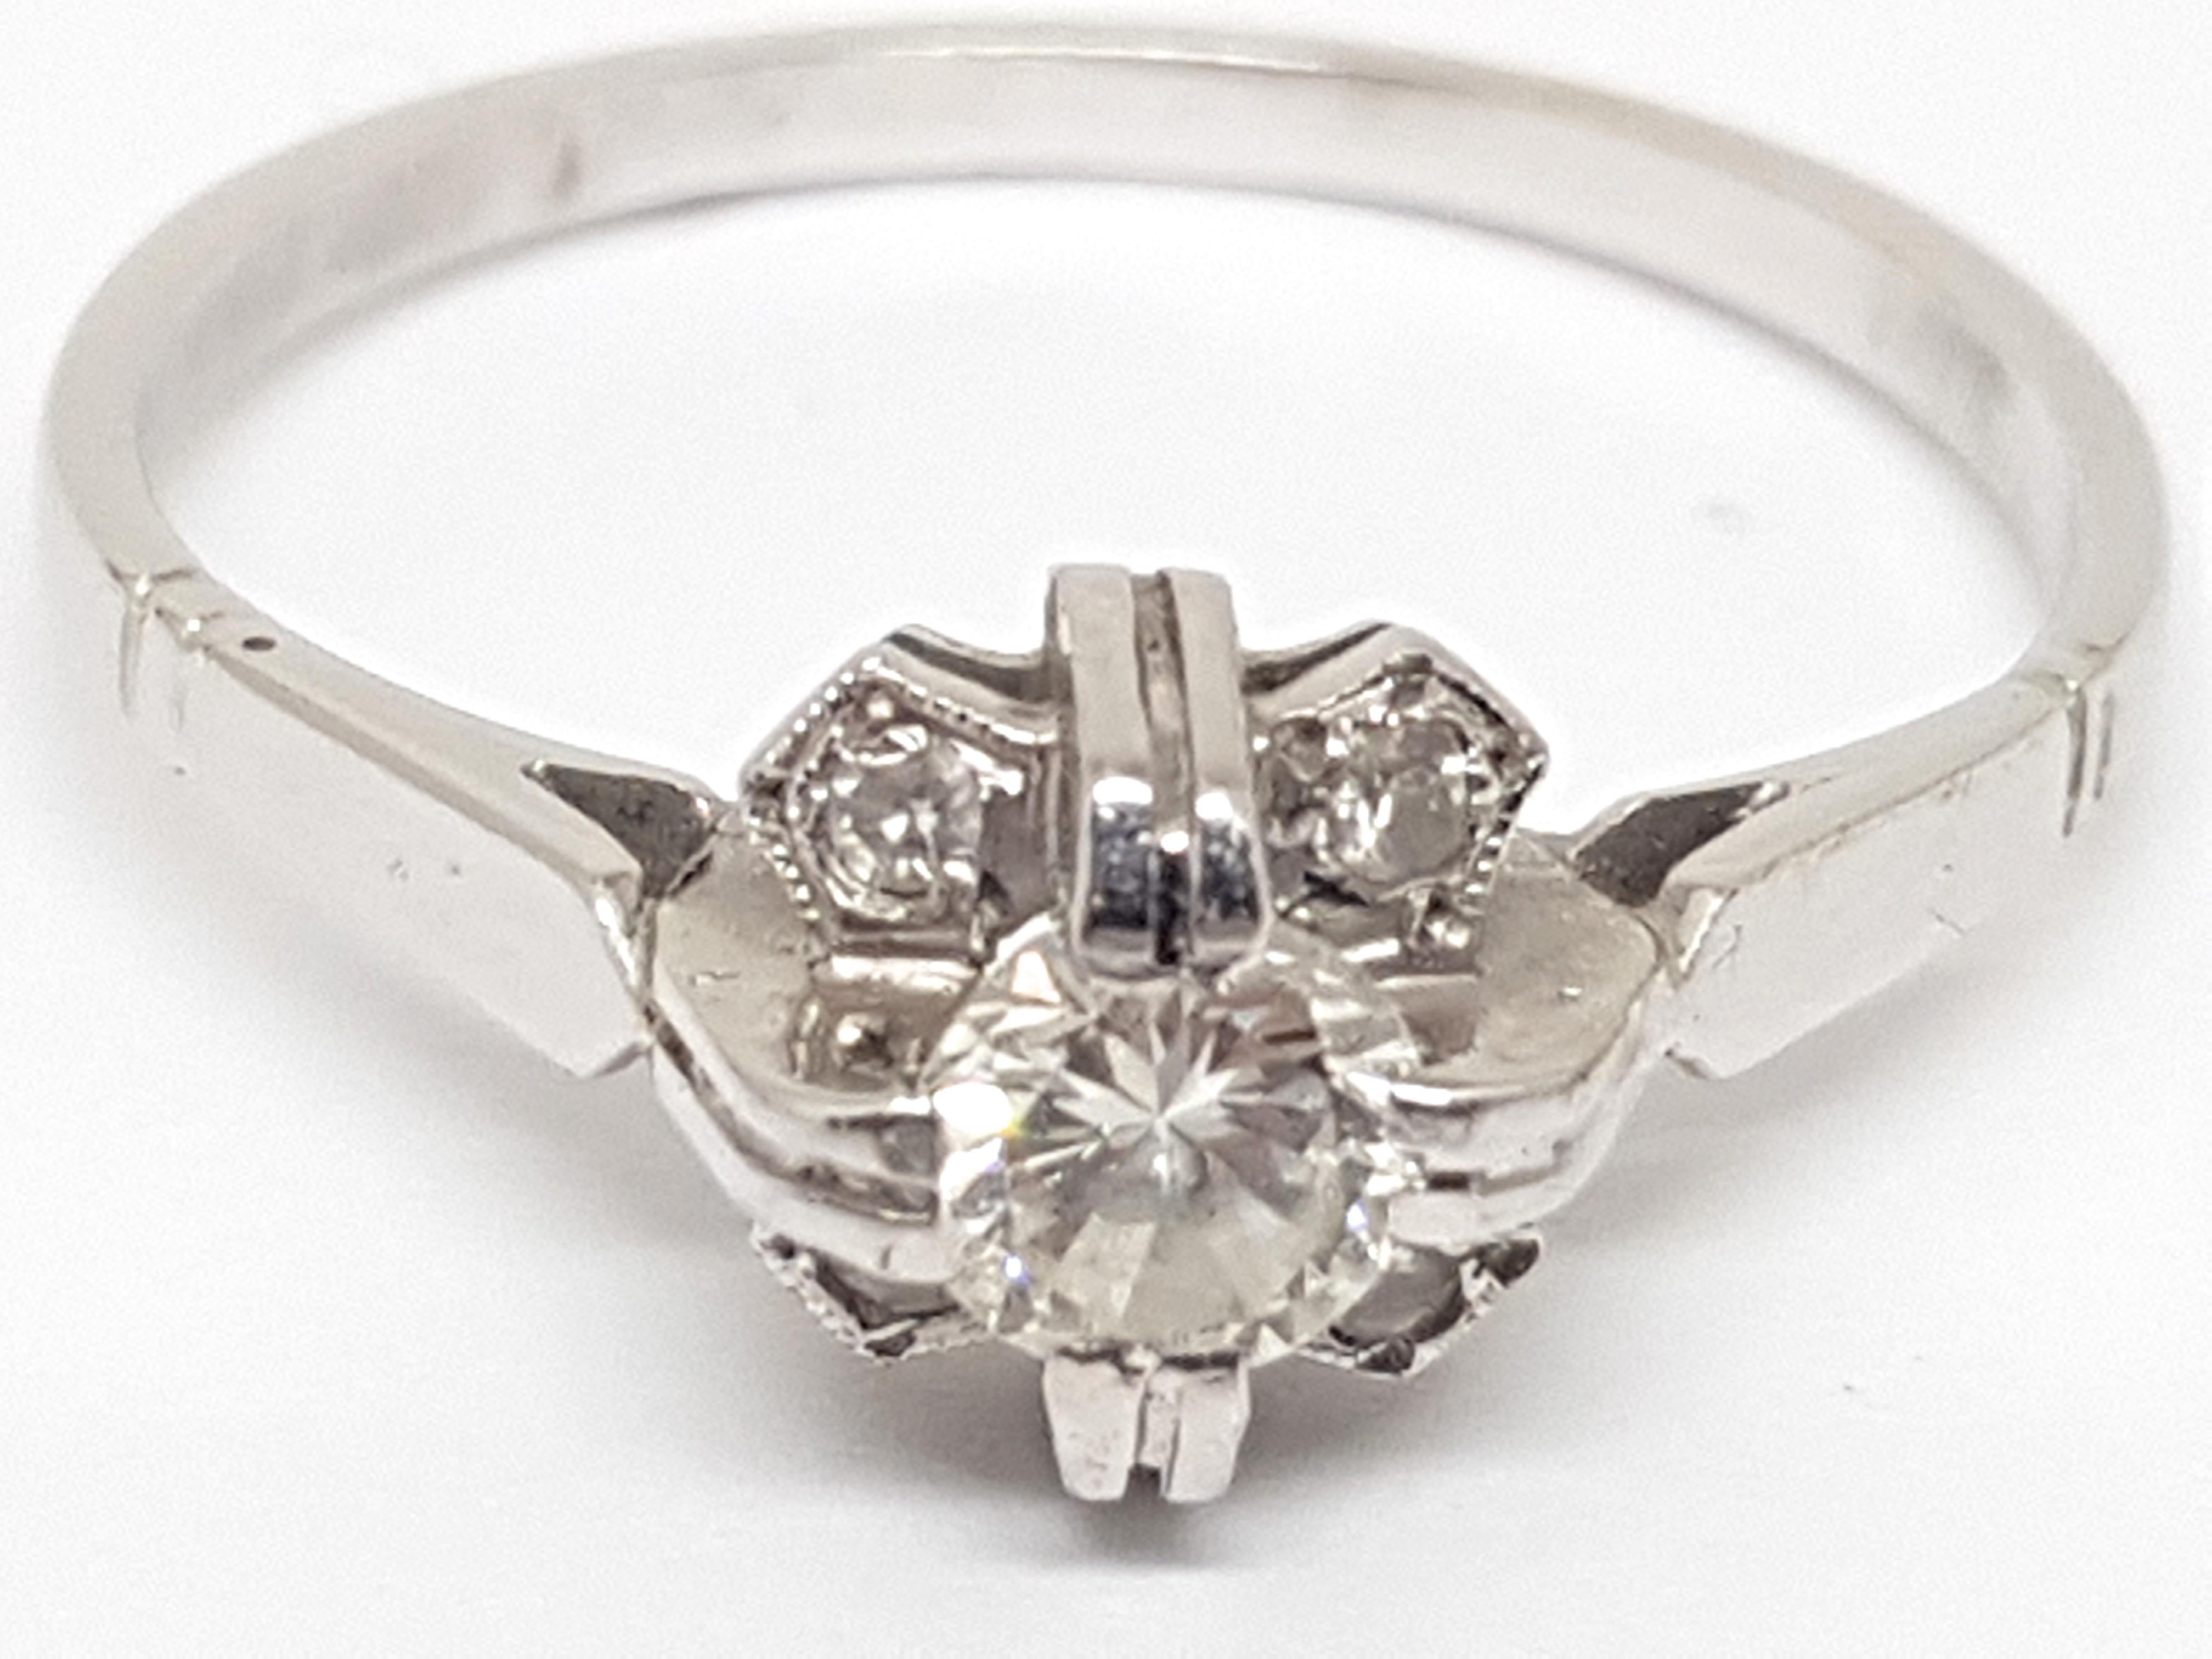 0.44 Carat Antique White Gold Diamond Engagement Ring In Excellent Condition For Sale In Antwerp, BE